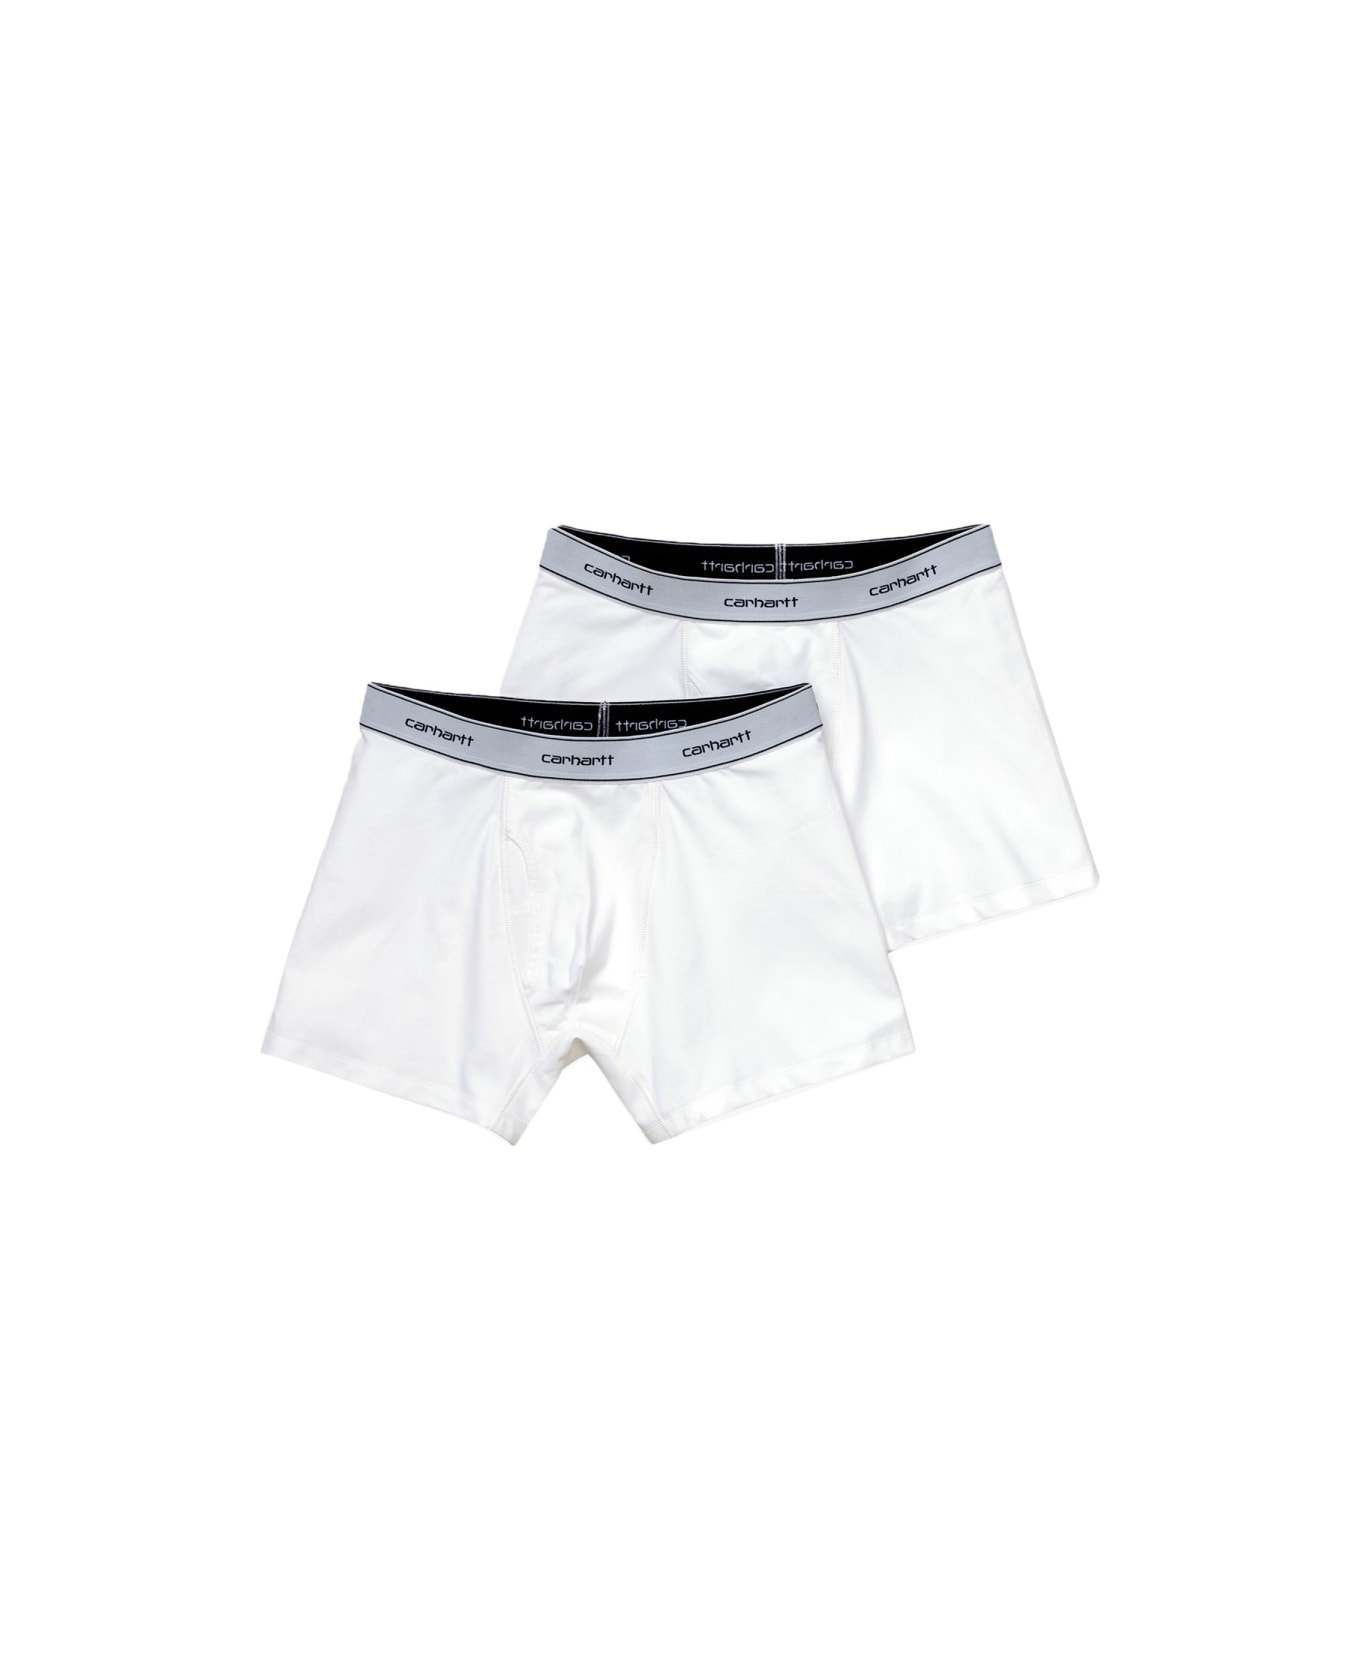 Carhartt WIP Pack Of Two Boxers - White ショーツ